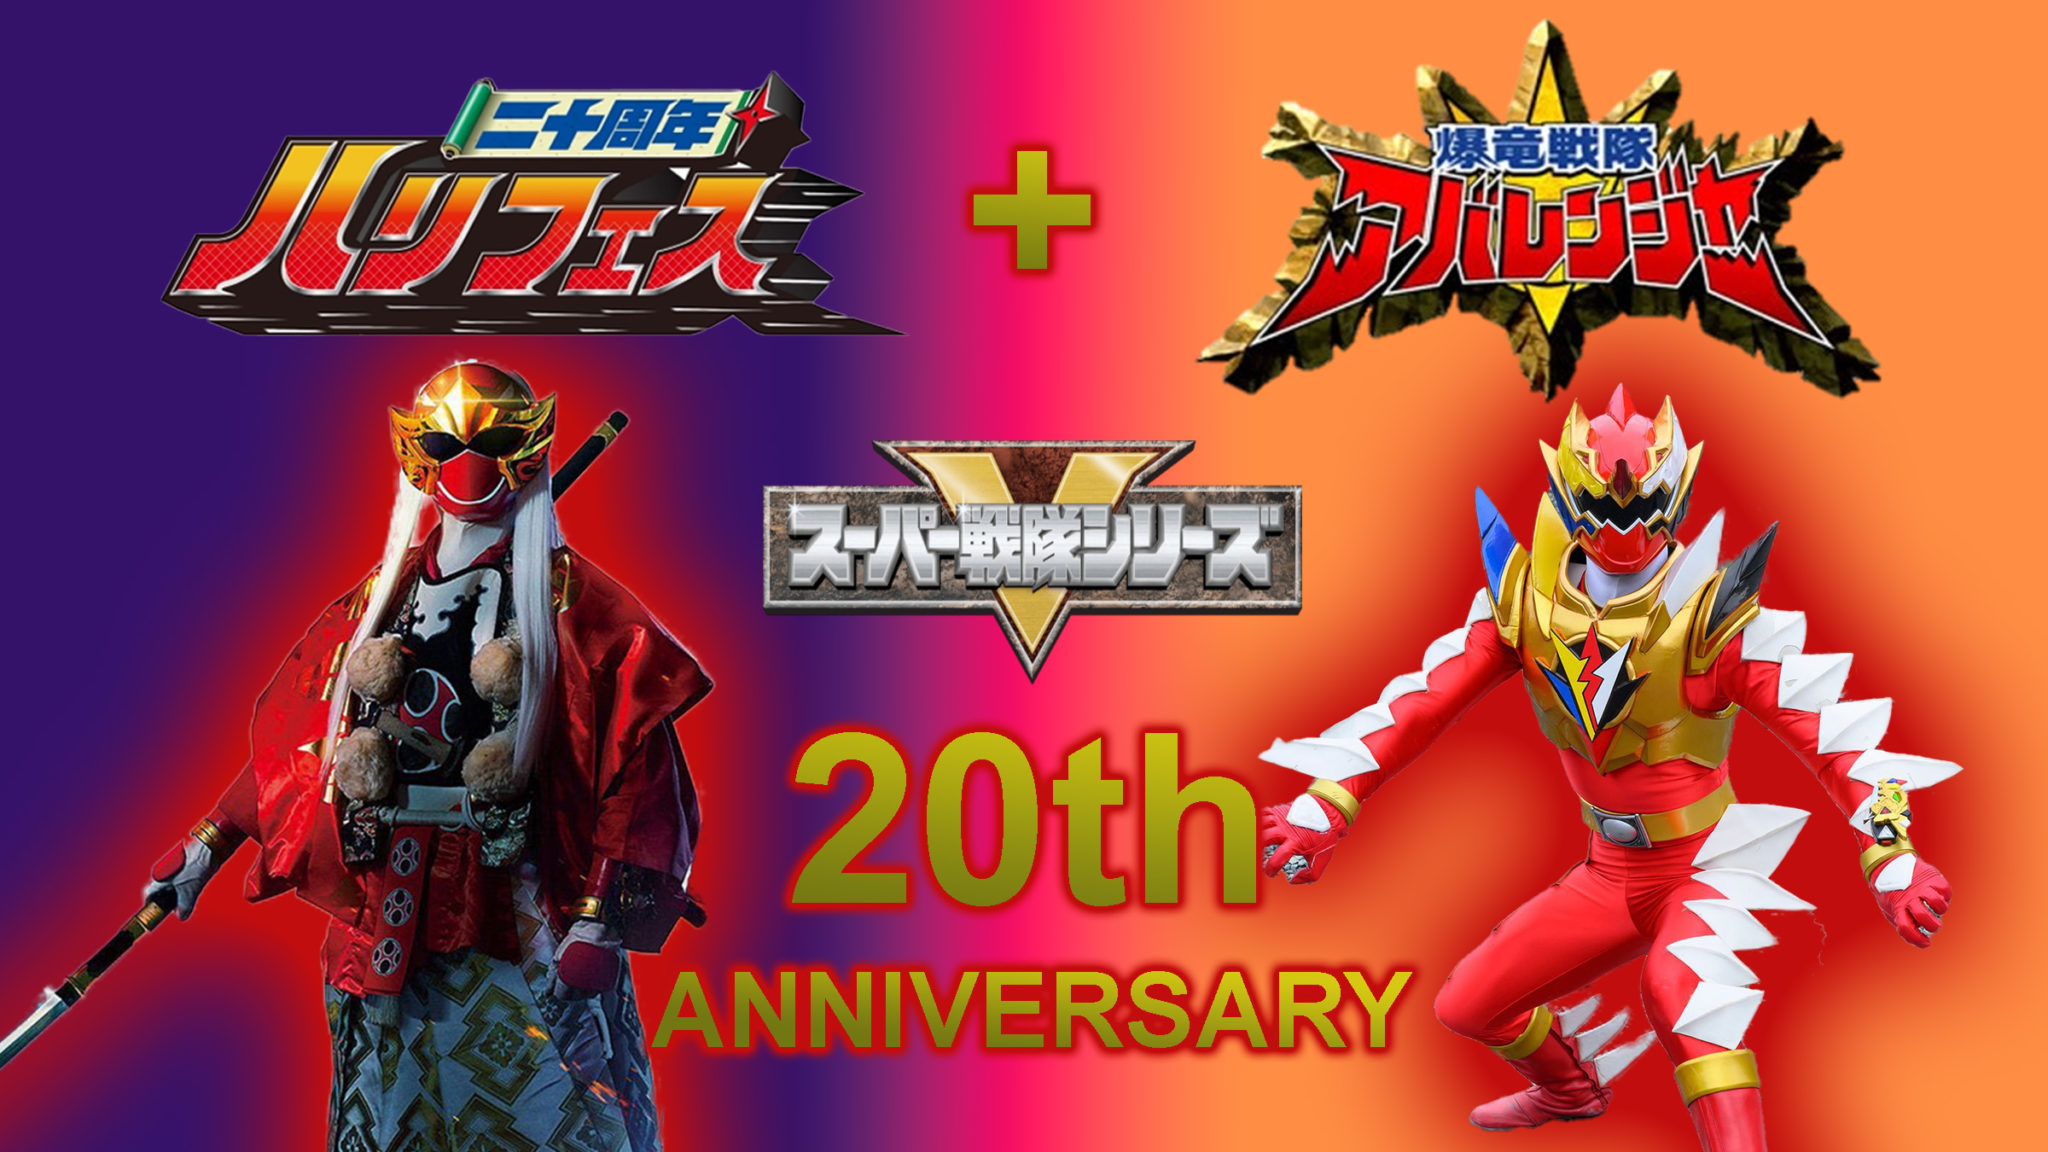 20th Anniversary Releases For Super Sentai shows, Hurricaneger and